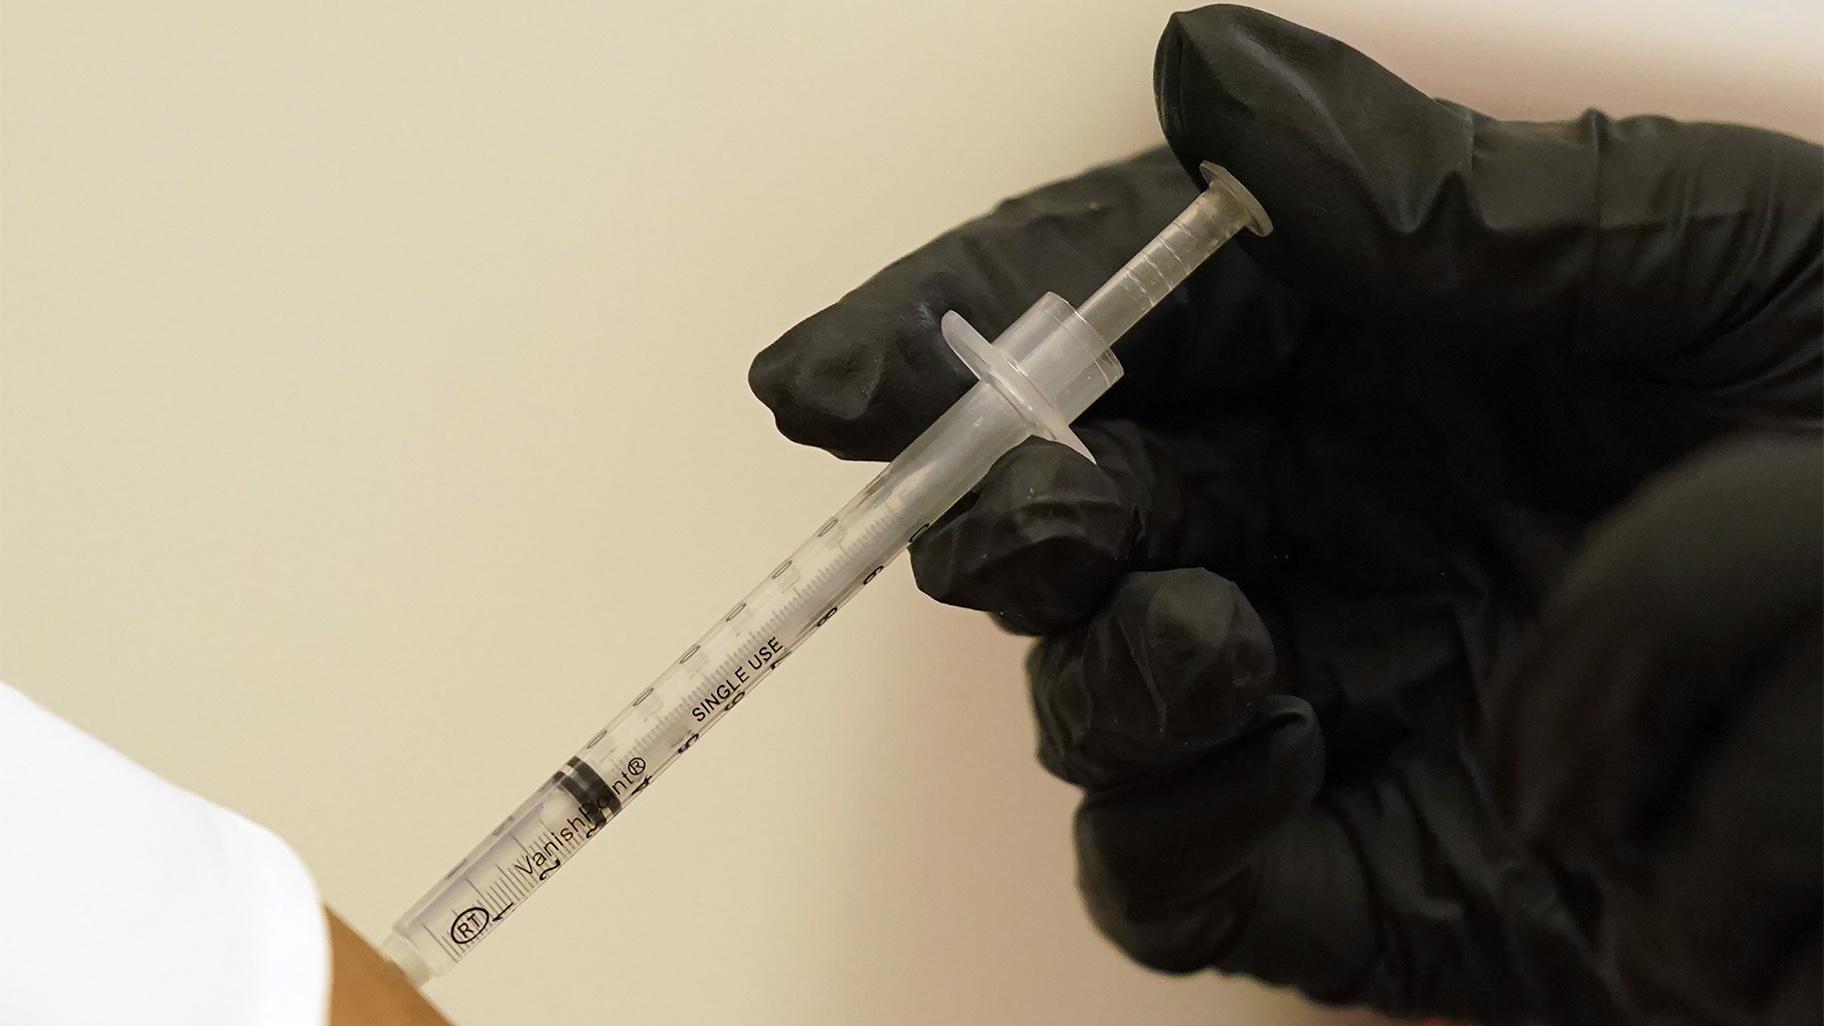 A person is injected with her second dose of the Pfizer COVID-19 vaccine at a Dallas County Health and Human Services vaccination site in Dallas, Thursday, Aug. 26, 2021. (AP Photo / LM Otero, File)